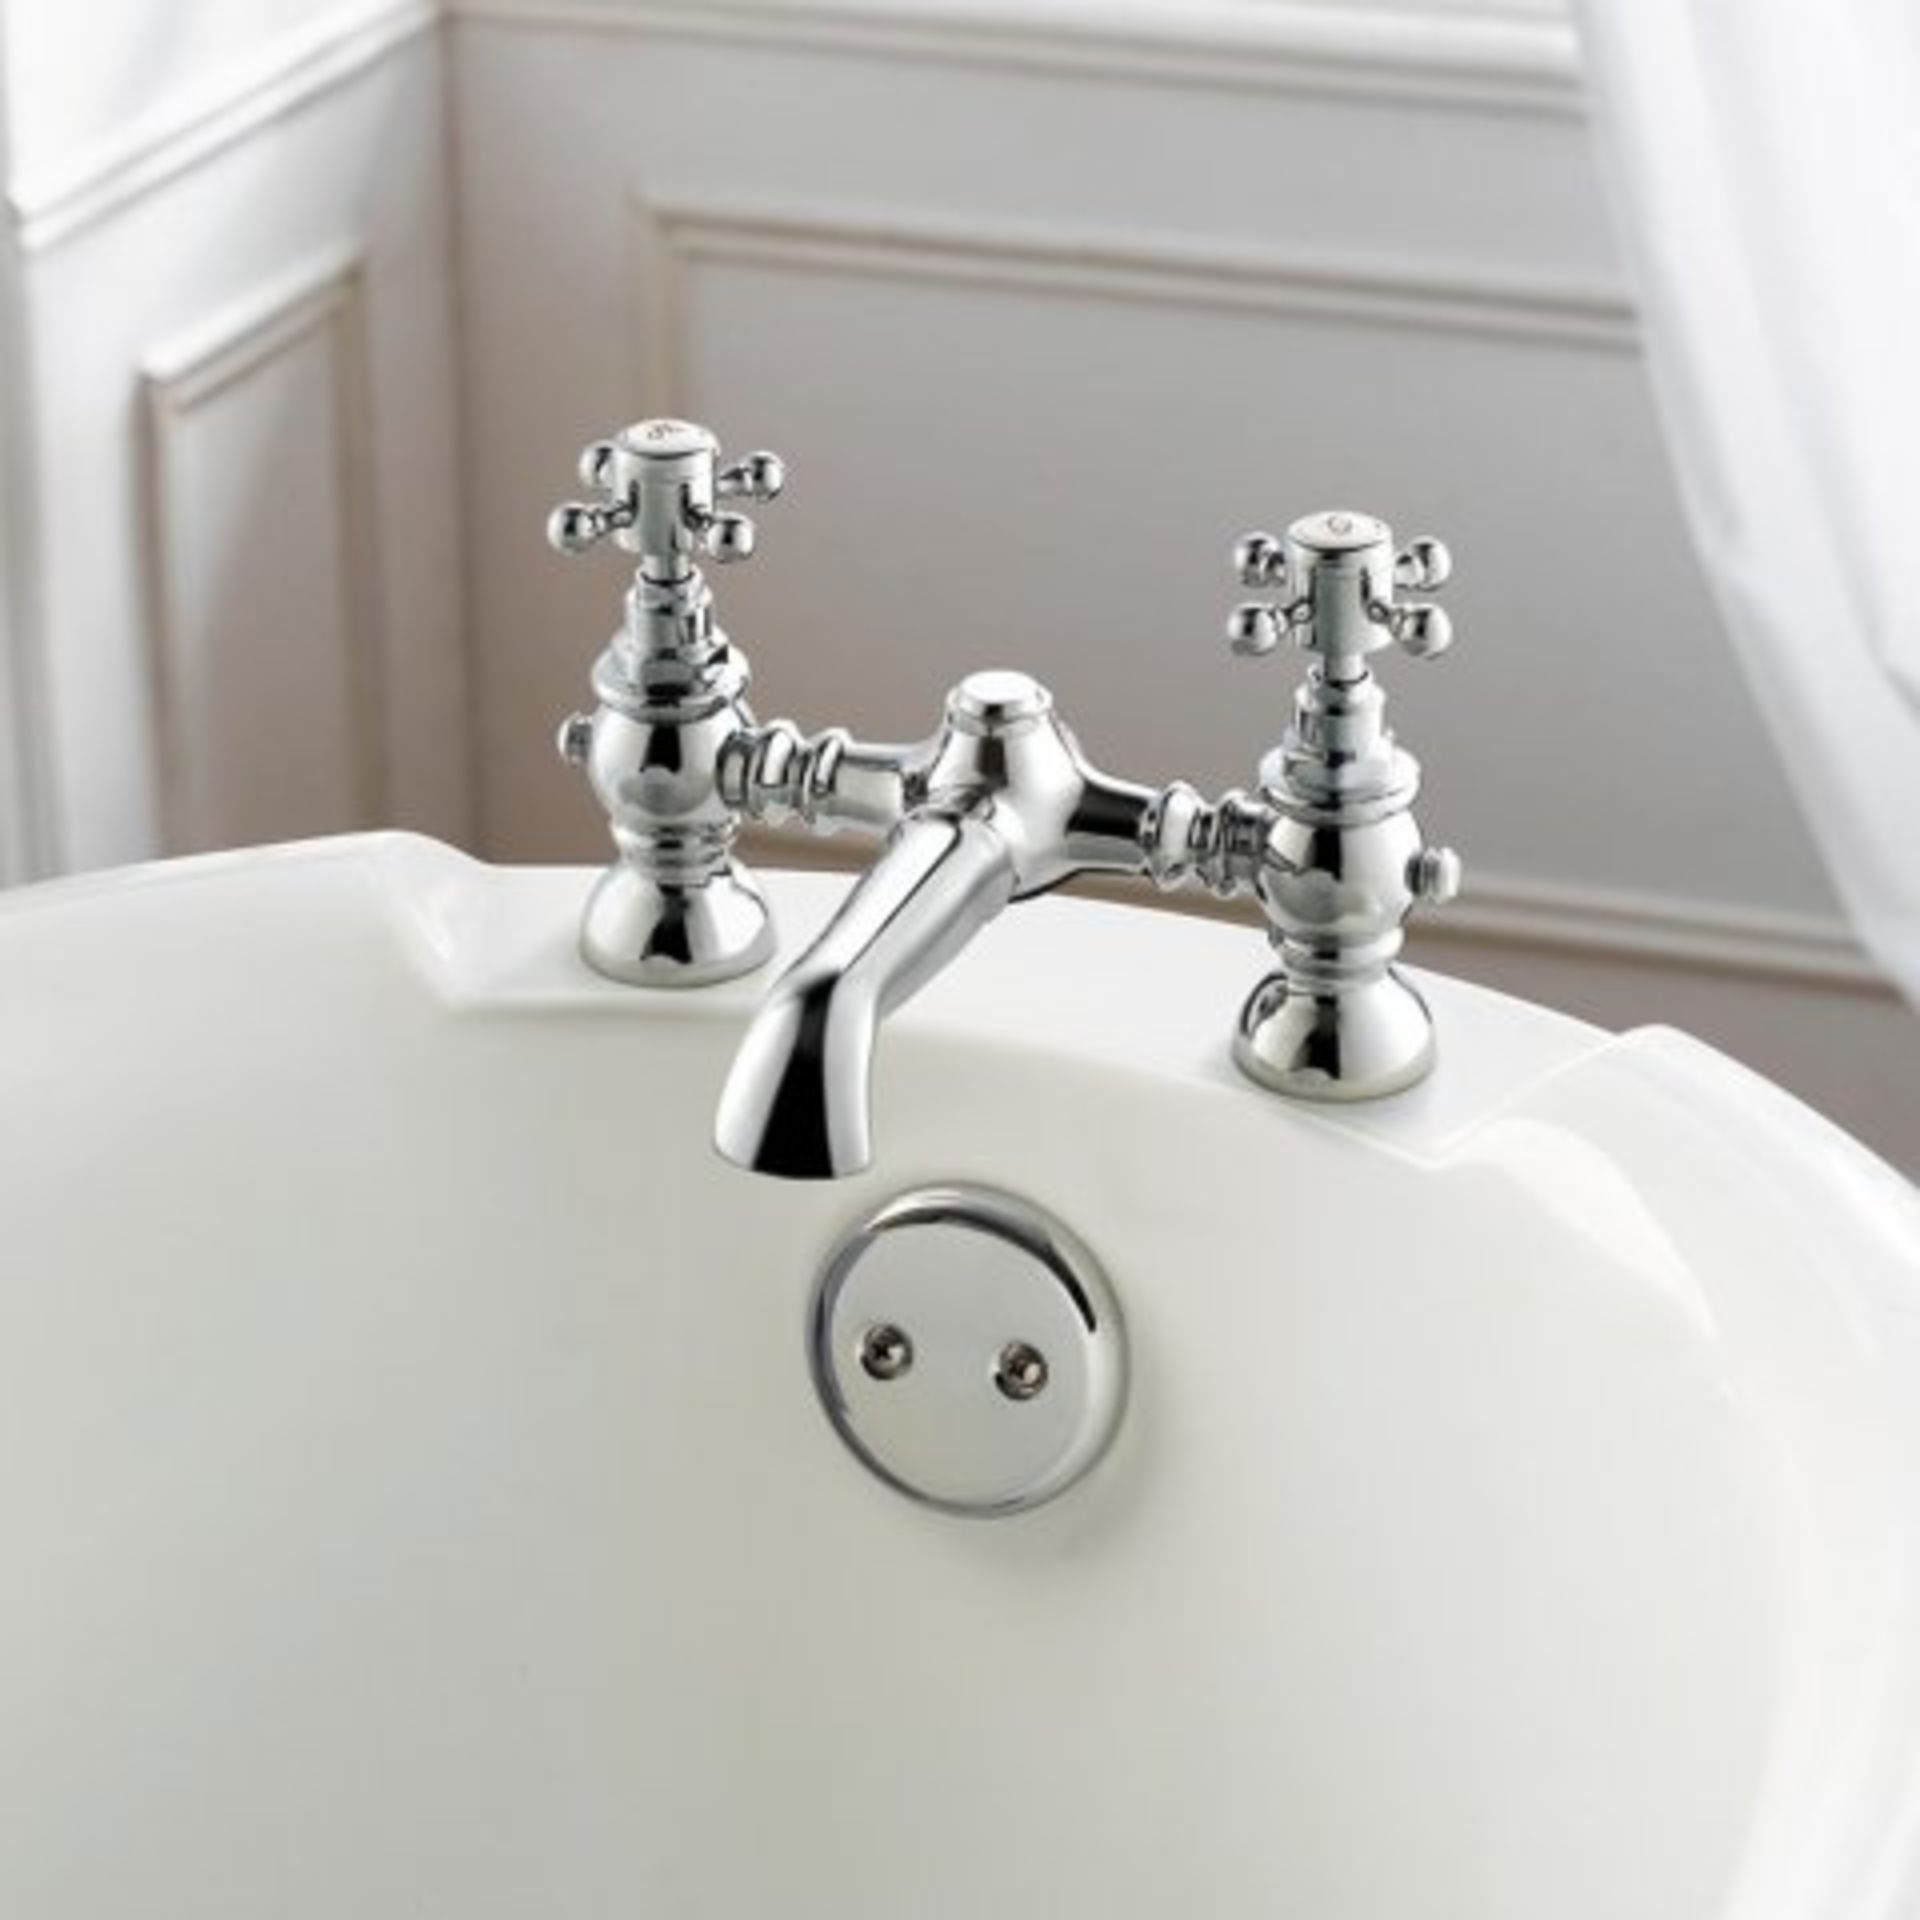 (J10) Victoria II Traditional Bath Mixer Tap. RRP £132.99. Our great range of traditional taps are - Image 2 of 5